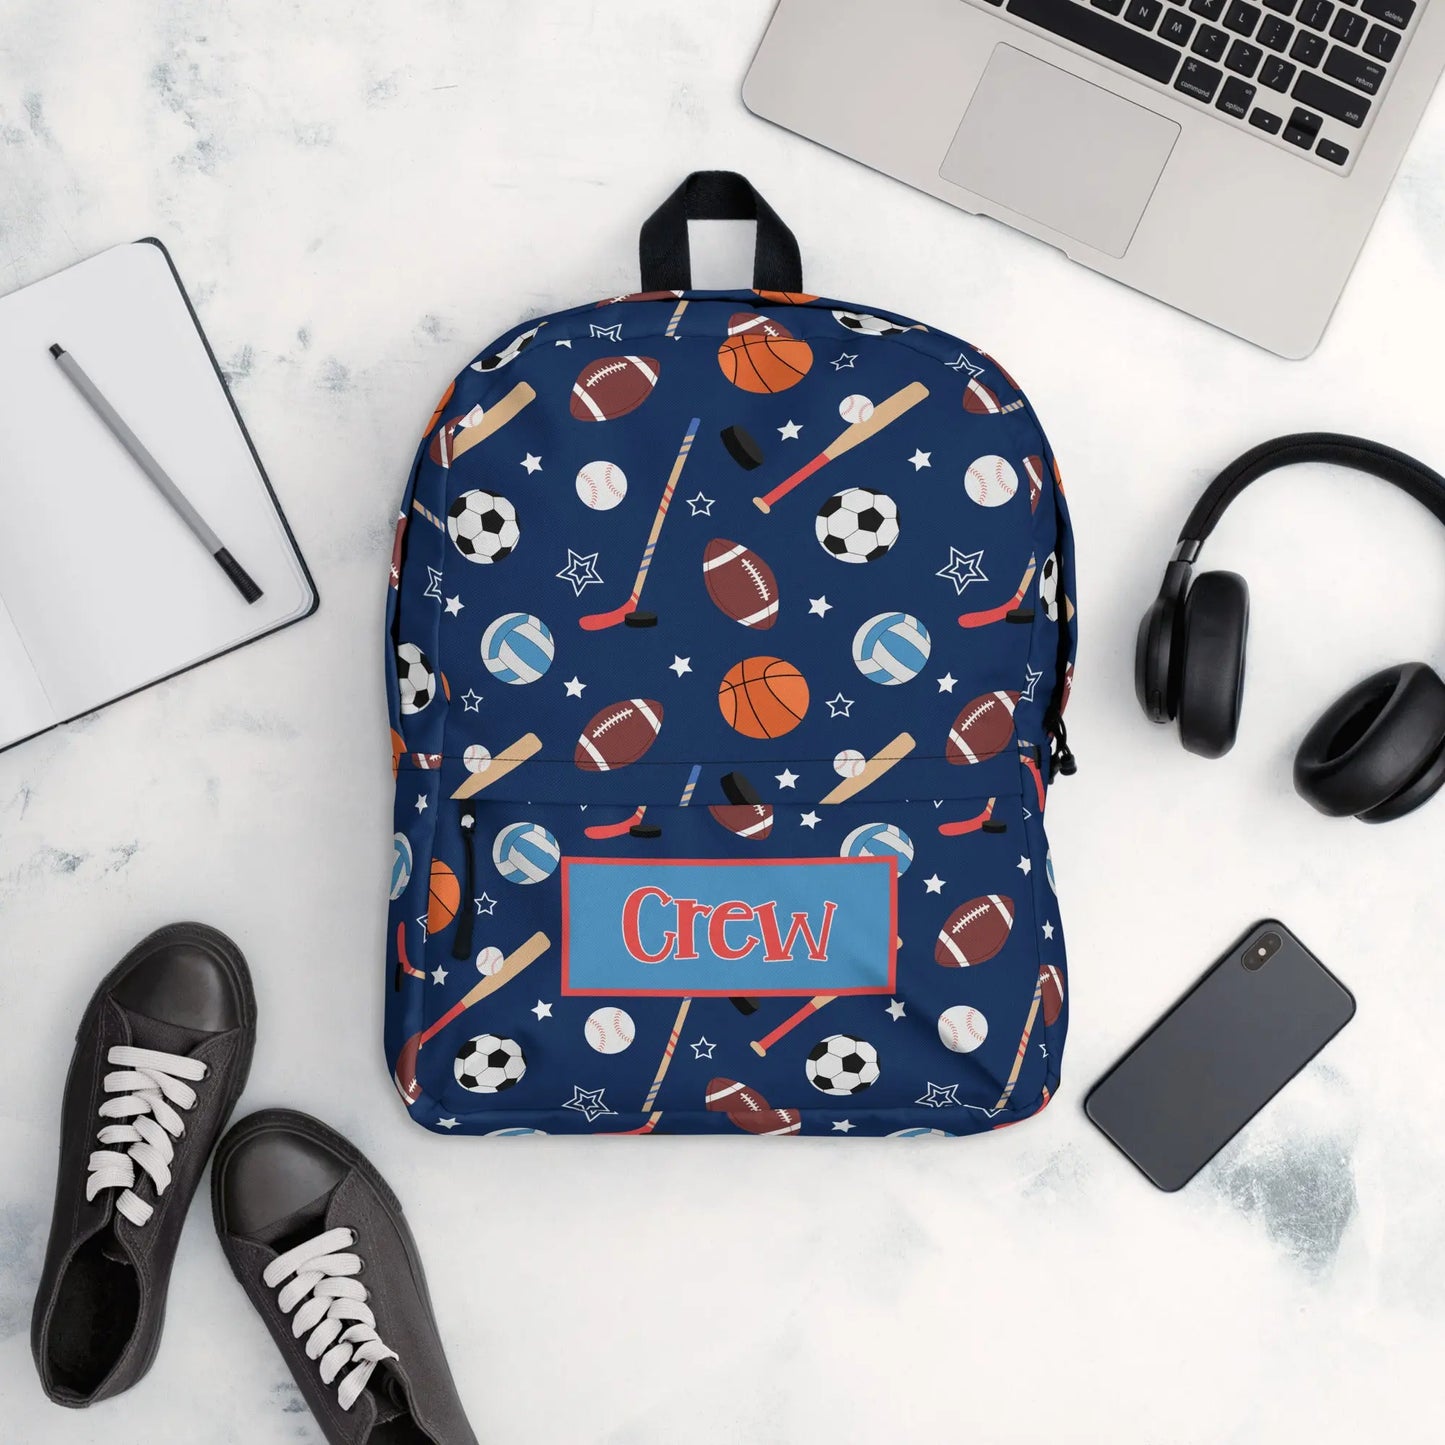 Sports Personalized Backpack Amazing Faith Designs